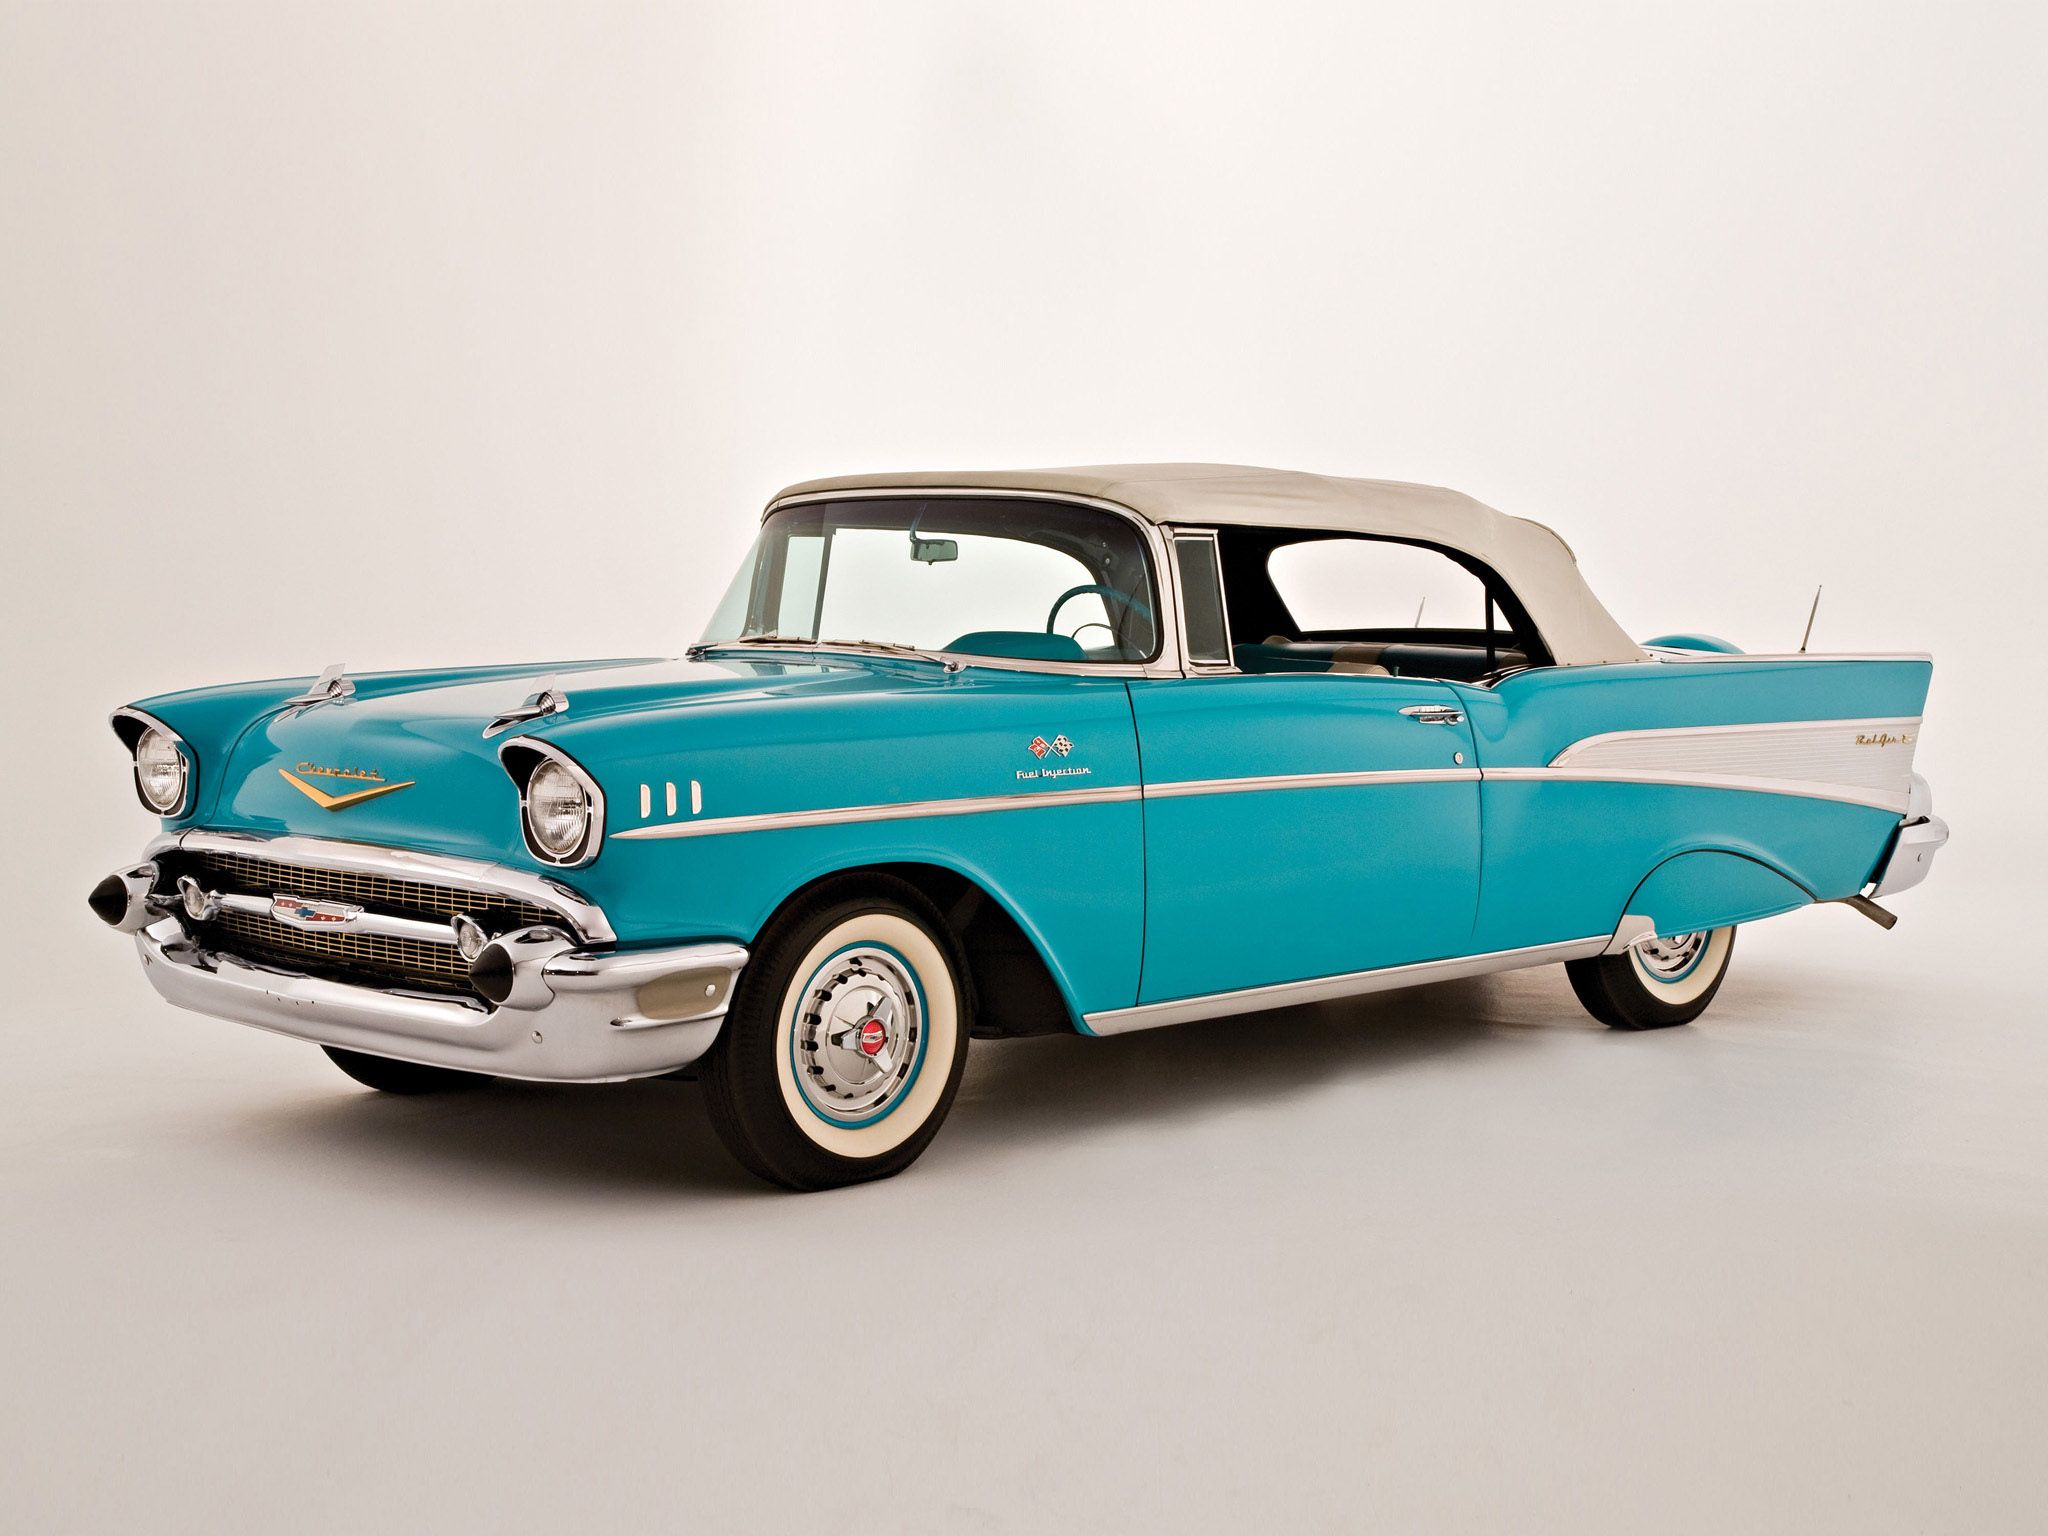 Pin by Jacob Plante on 1957 Chevrolet bel air.